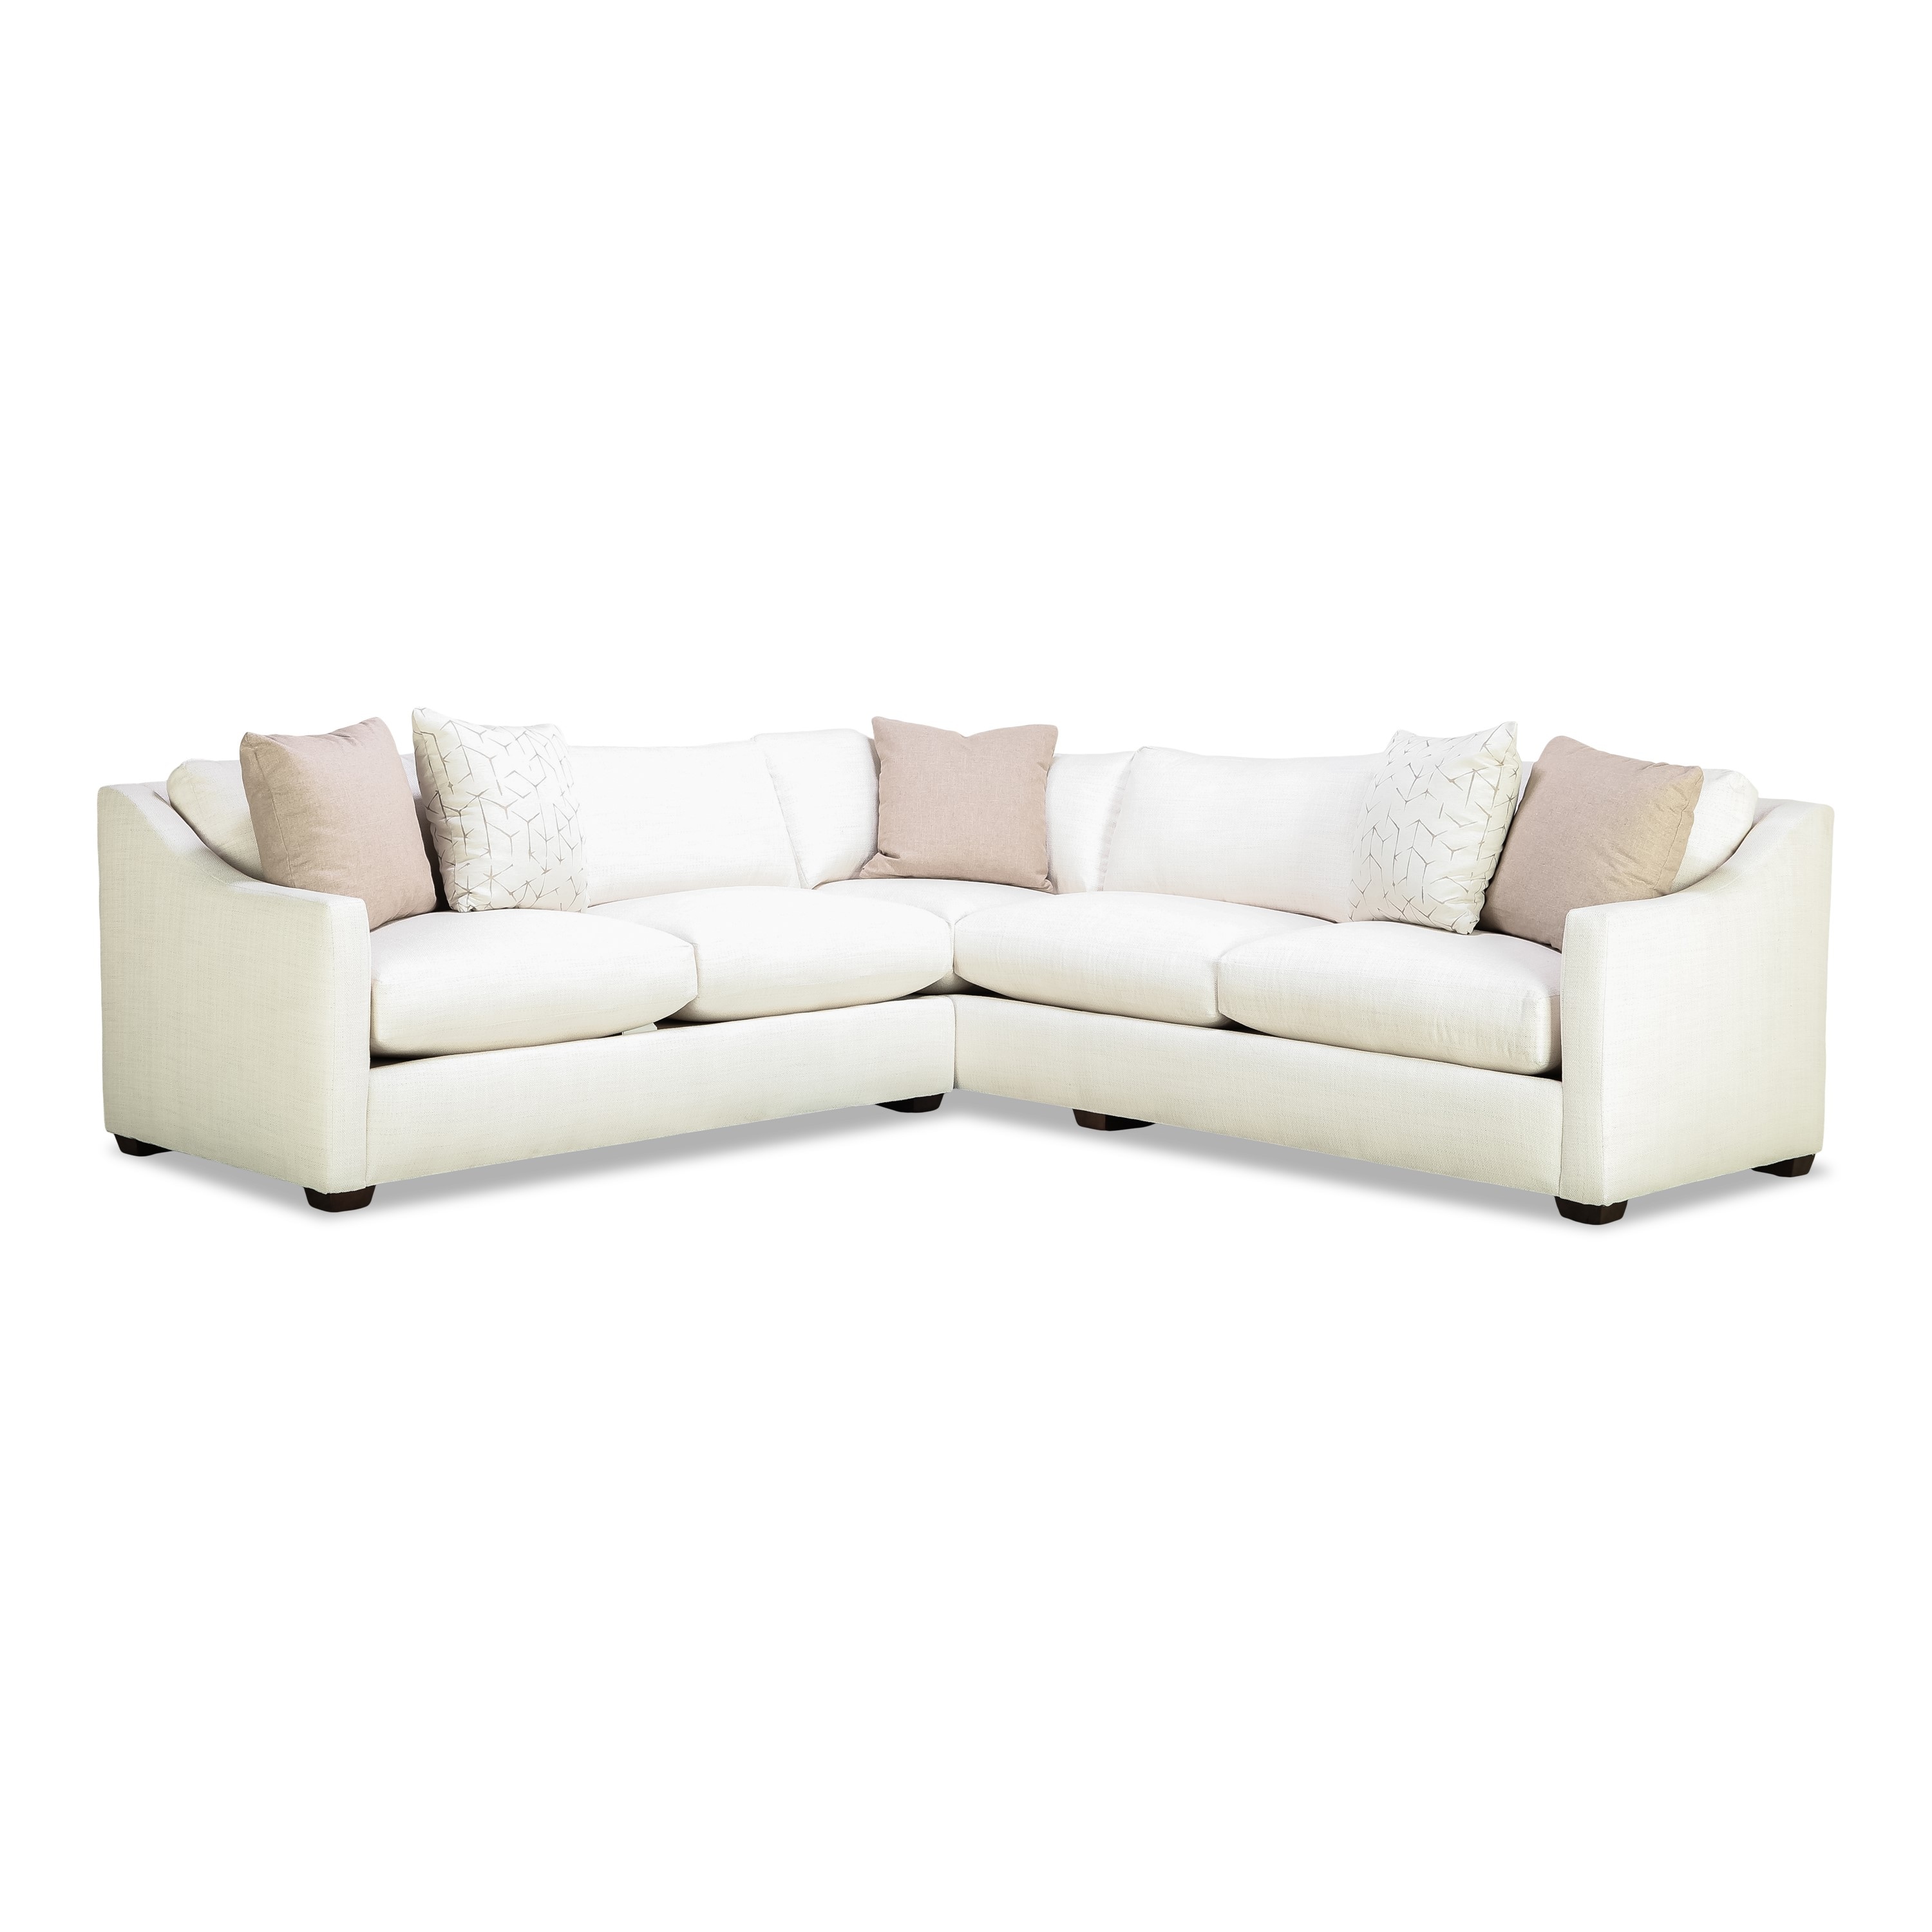 Bradford 2-Piece Sectional - Right Facing